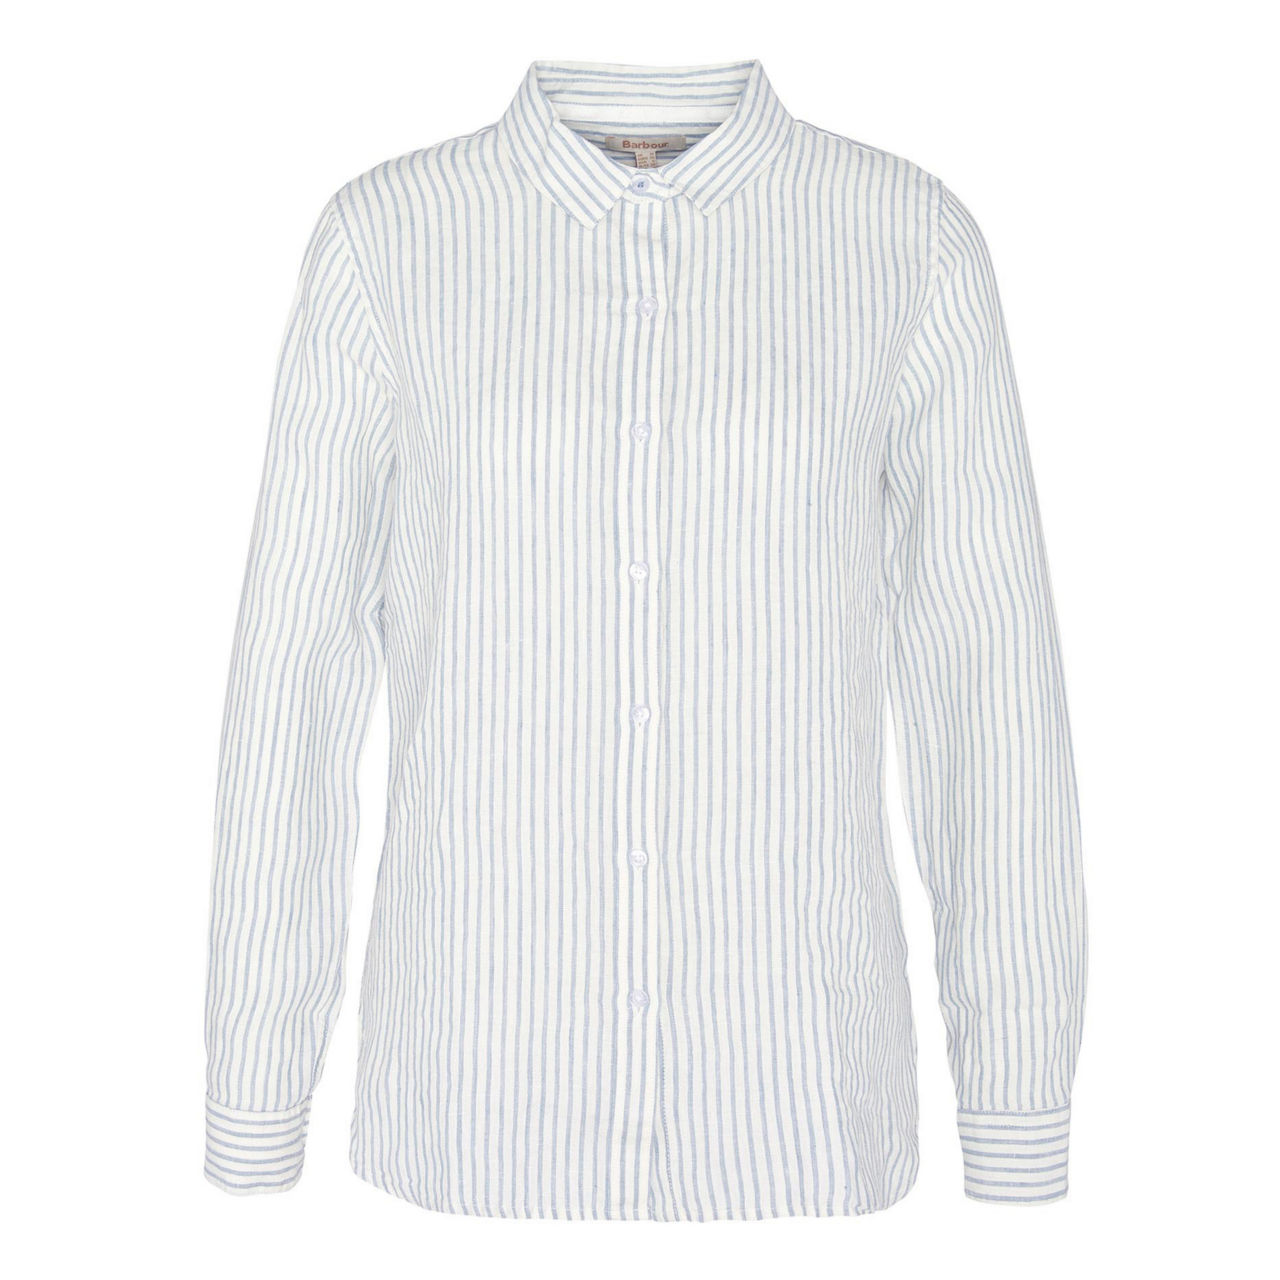 Barbour® Marine Linen Shirt - CHAMBRAY STRIPE image number 4